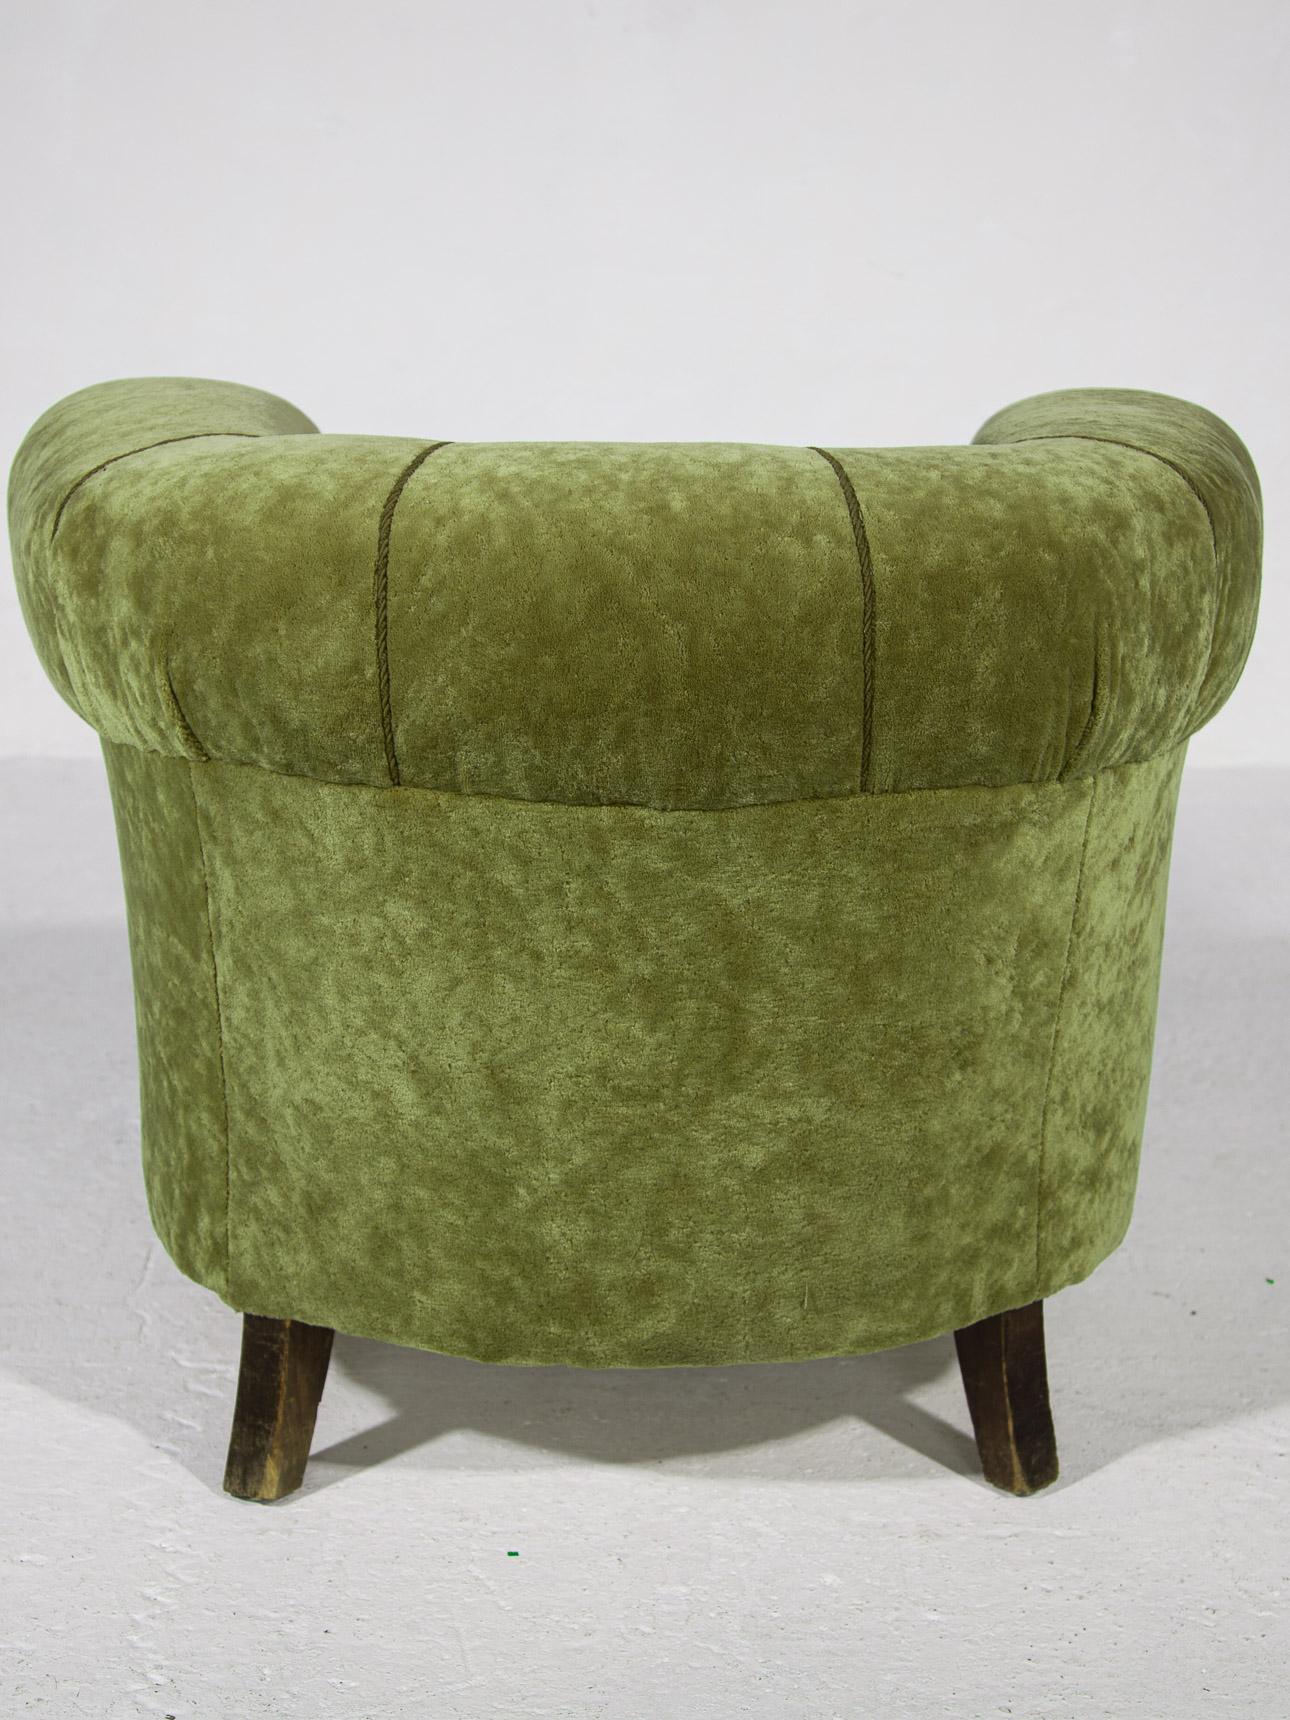 Early 20th Century Art Deco Lounge Chairs in Green Olive Velvet Upholstery For Sale